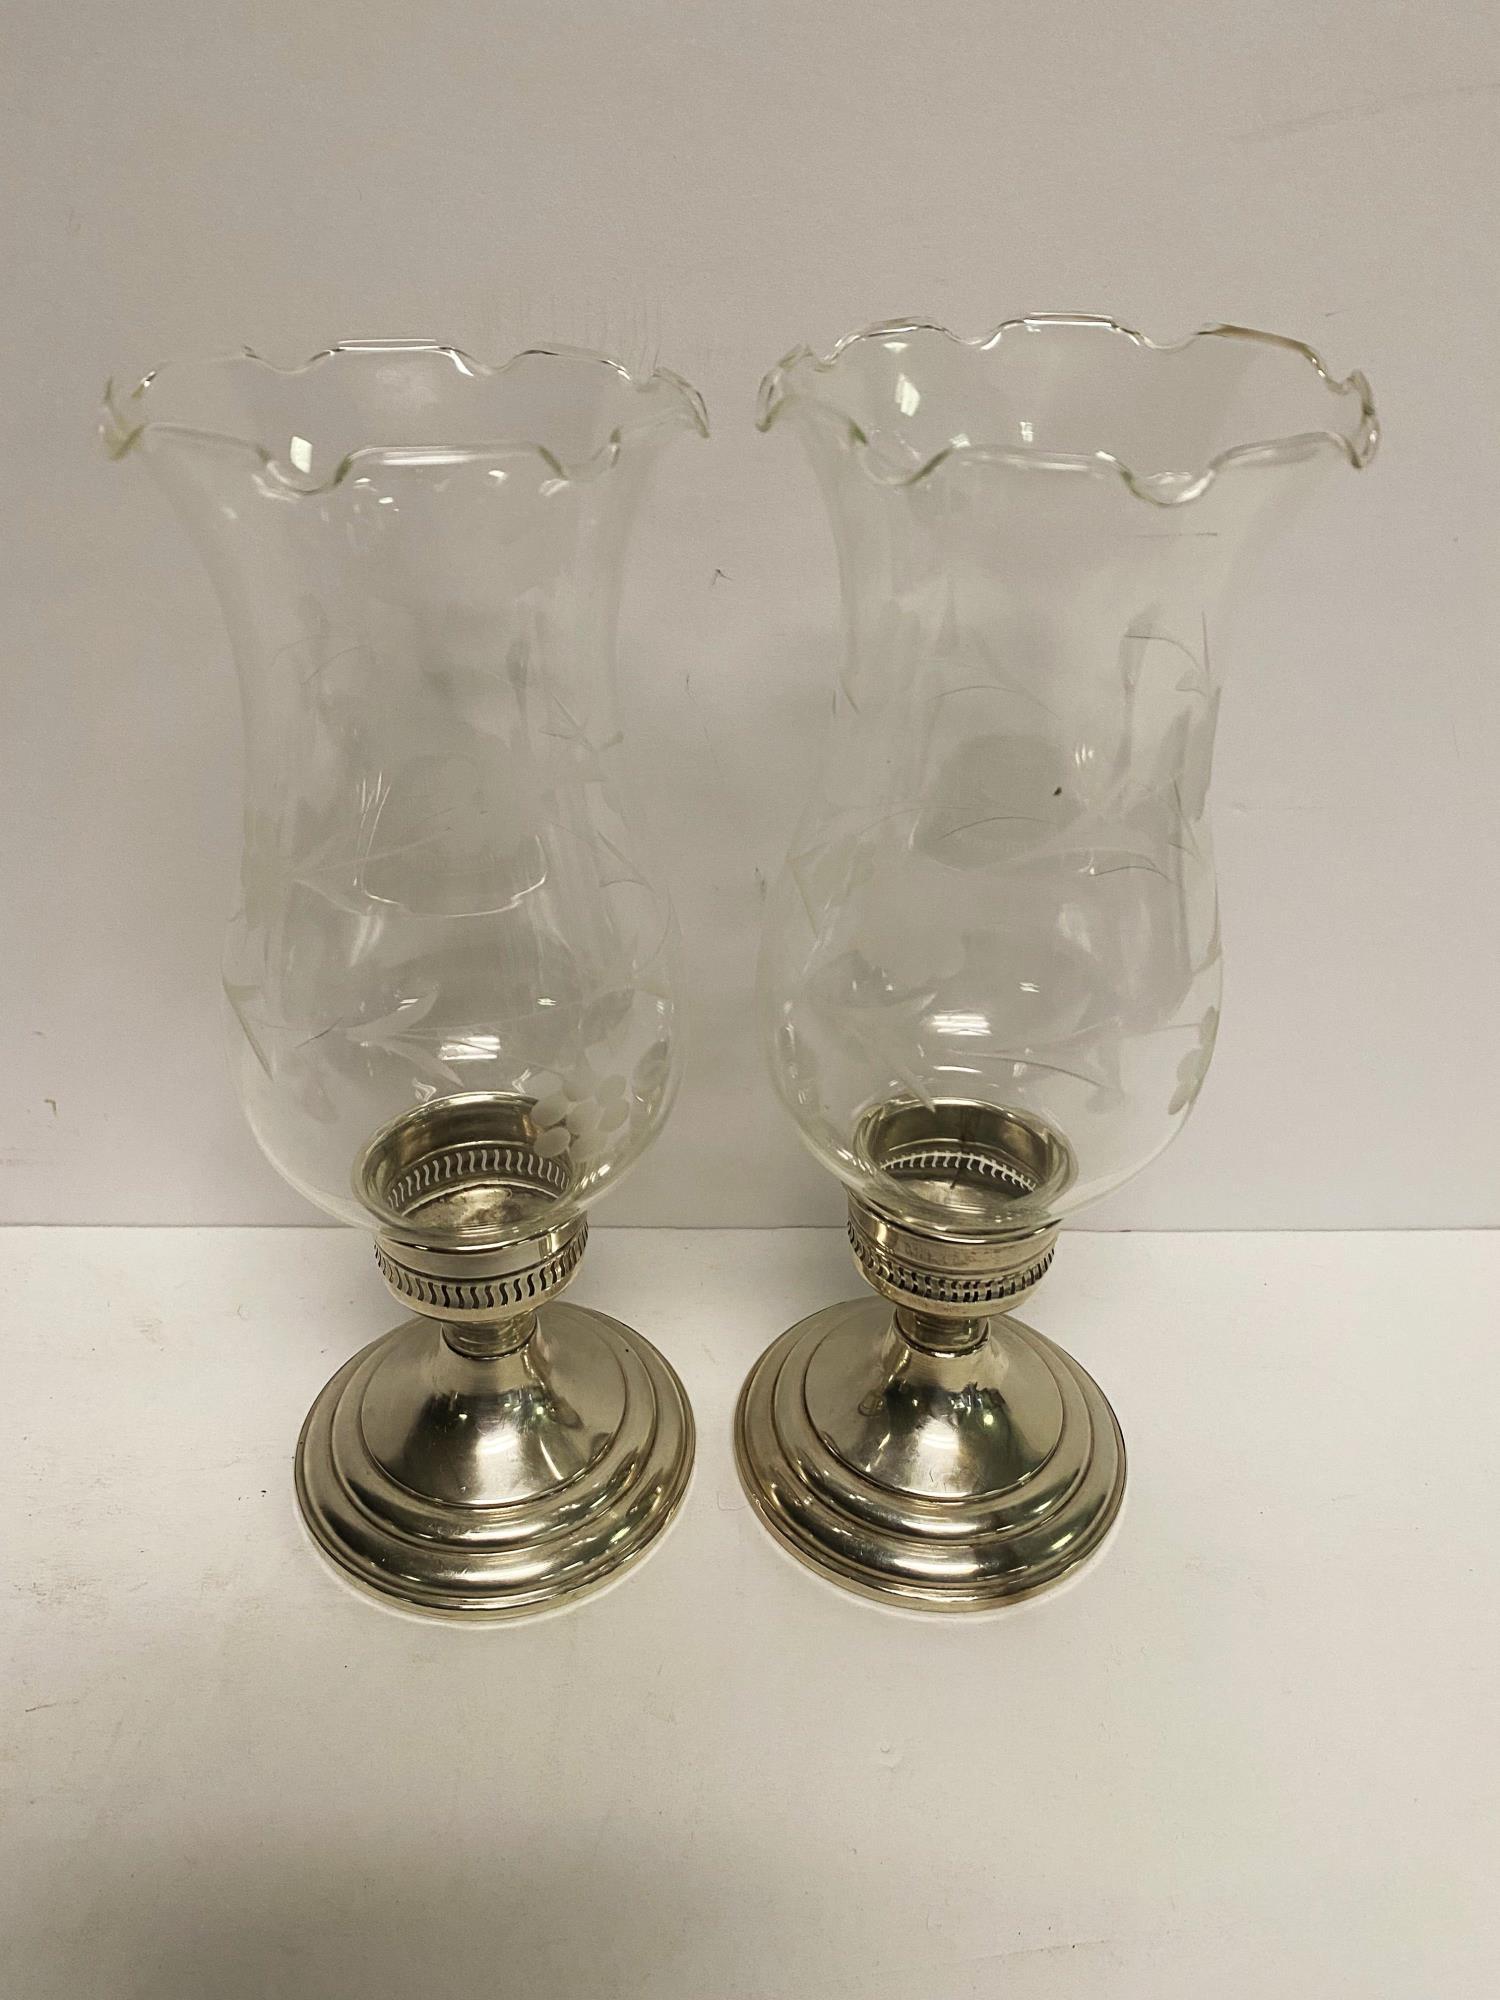 TWO PAIRS OF STERLING SILVER CANDLESTICKS